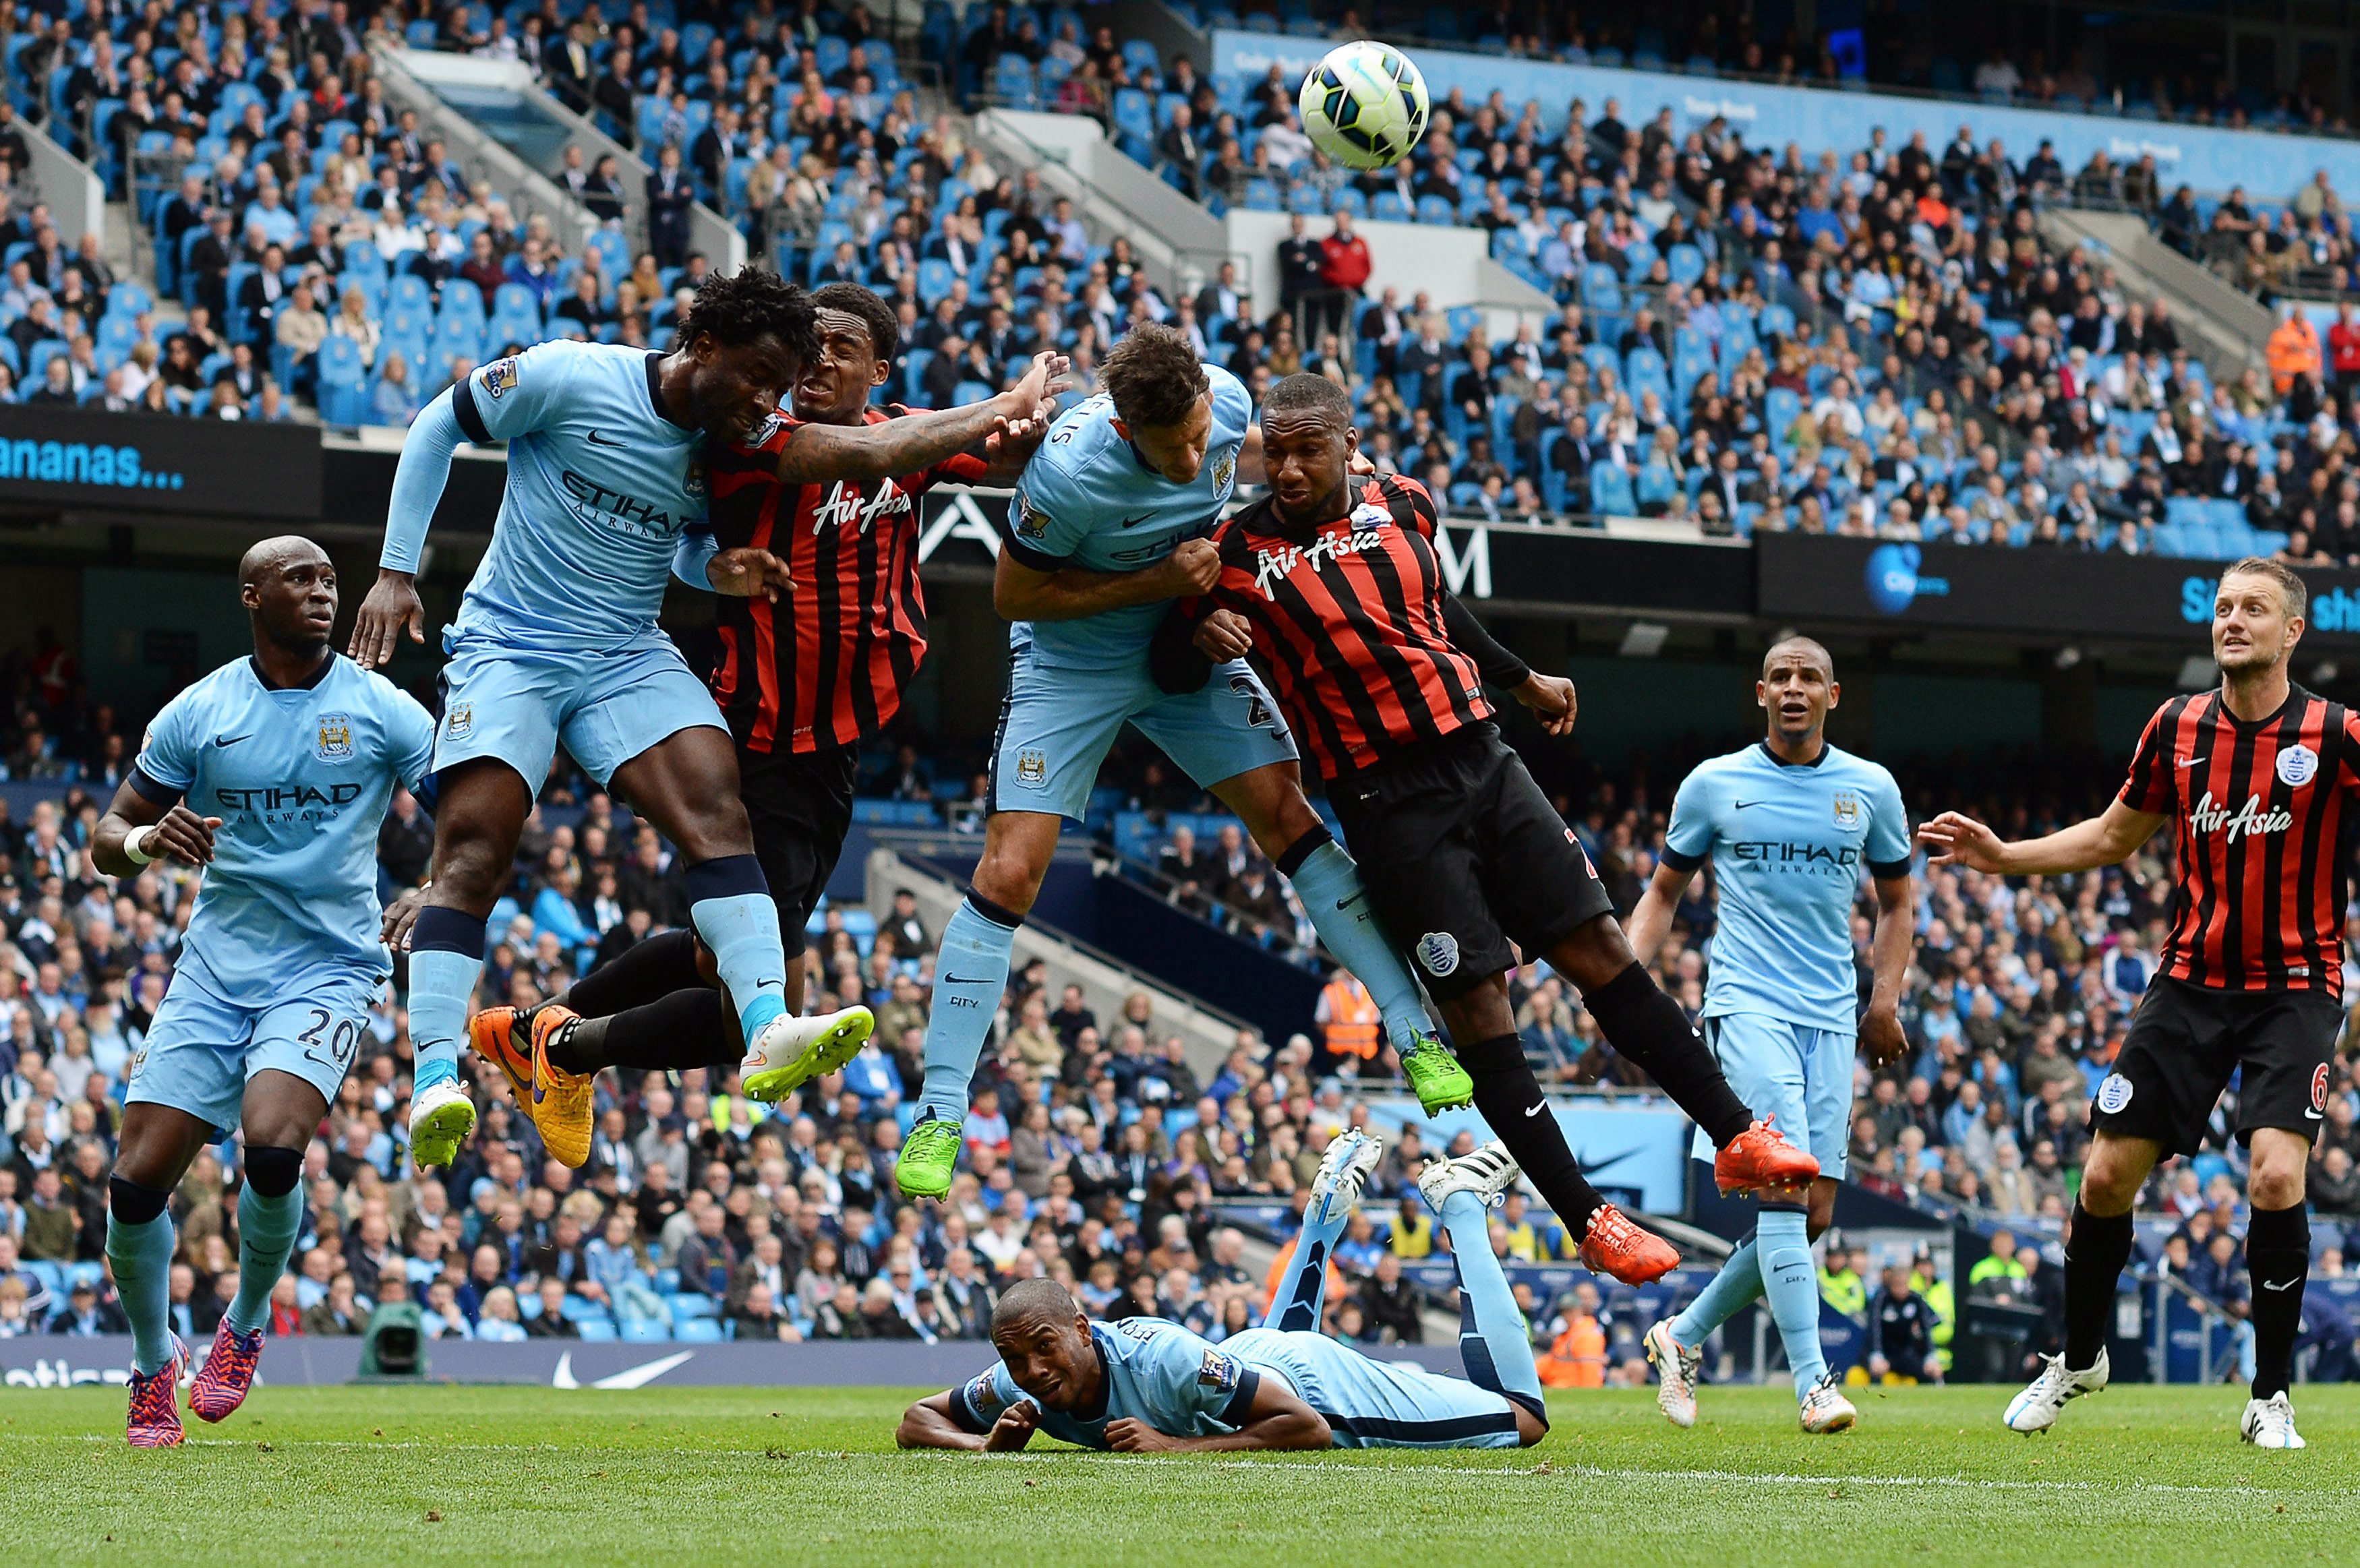 Queens Park Rangers Premier League journey ended with a whimper as they went down 6-0 at Manchester City. Photo: EPA